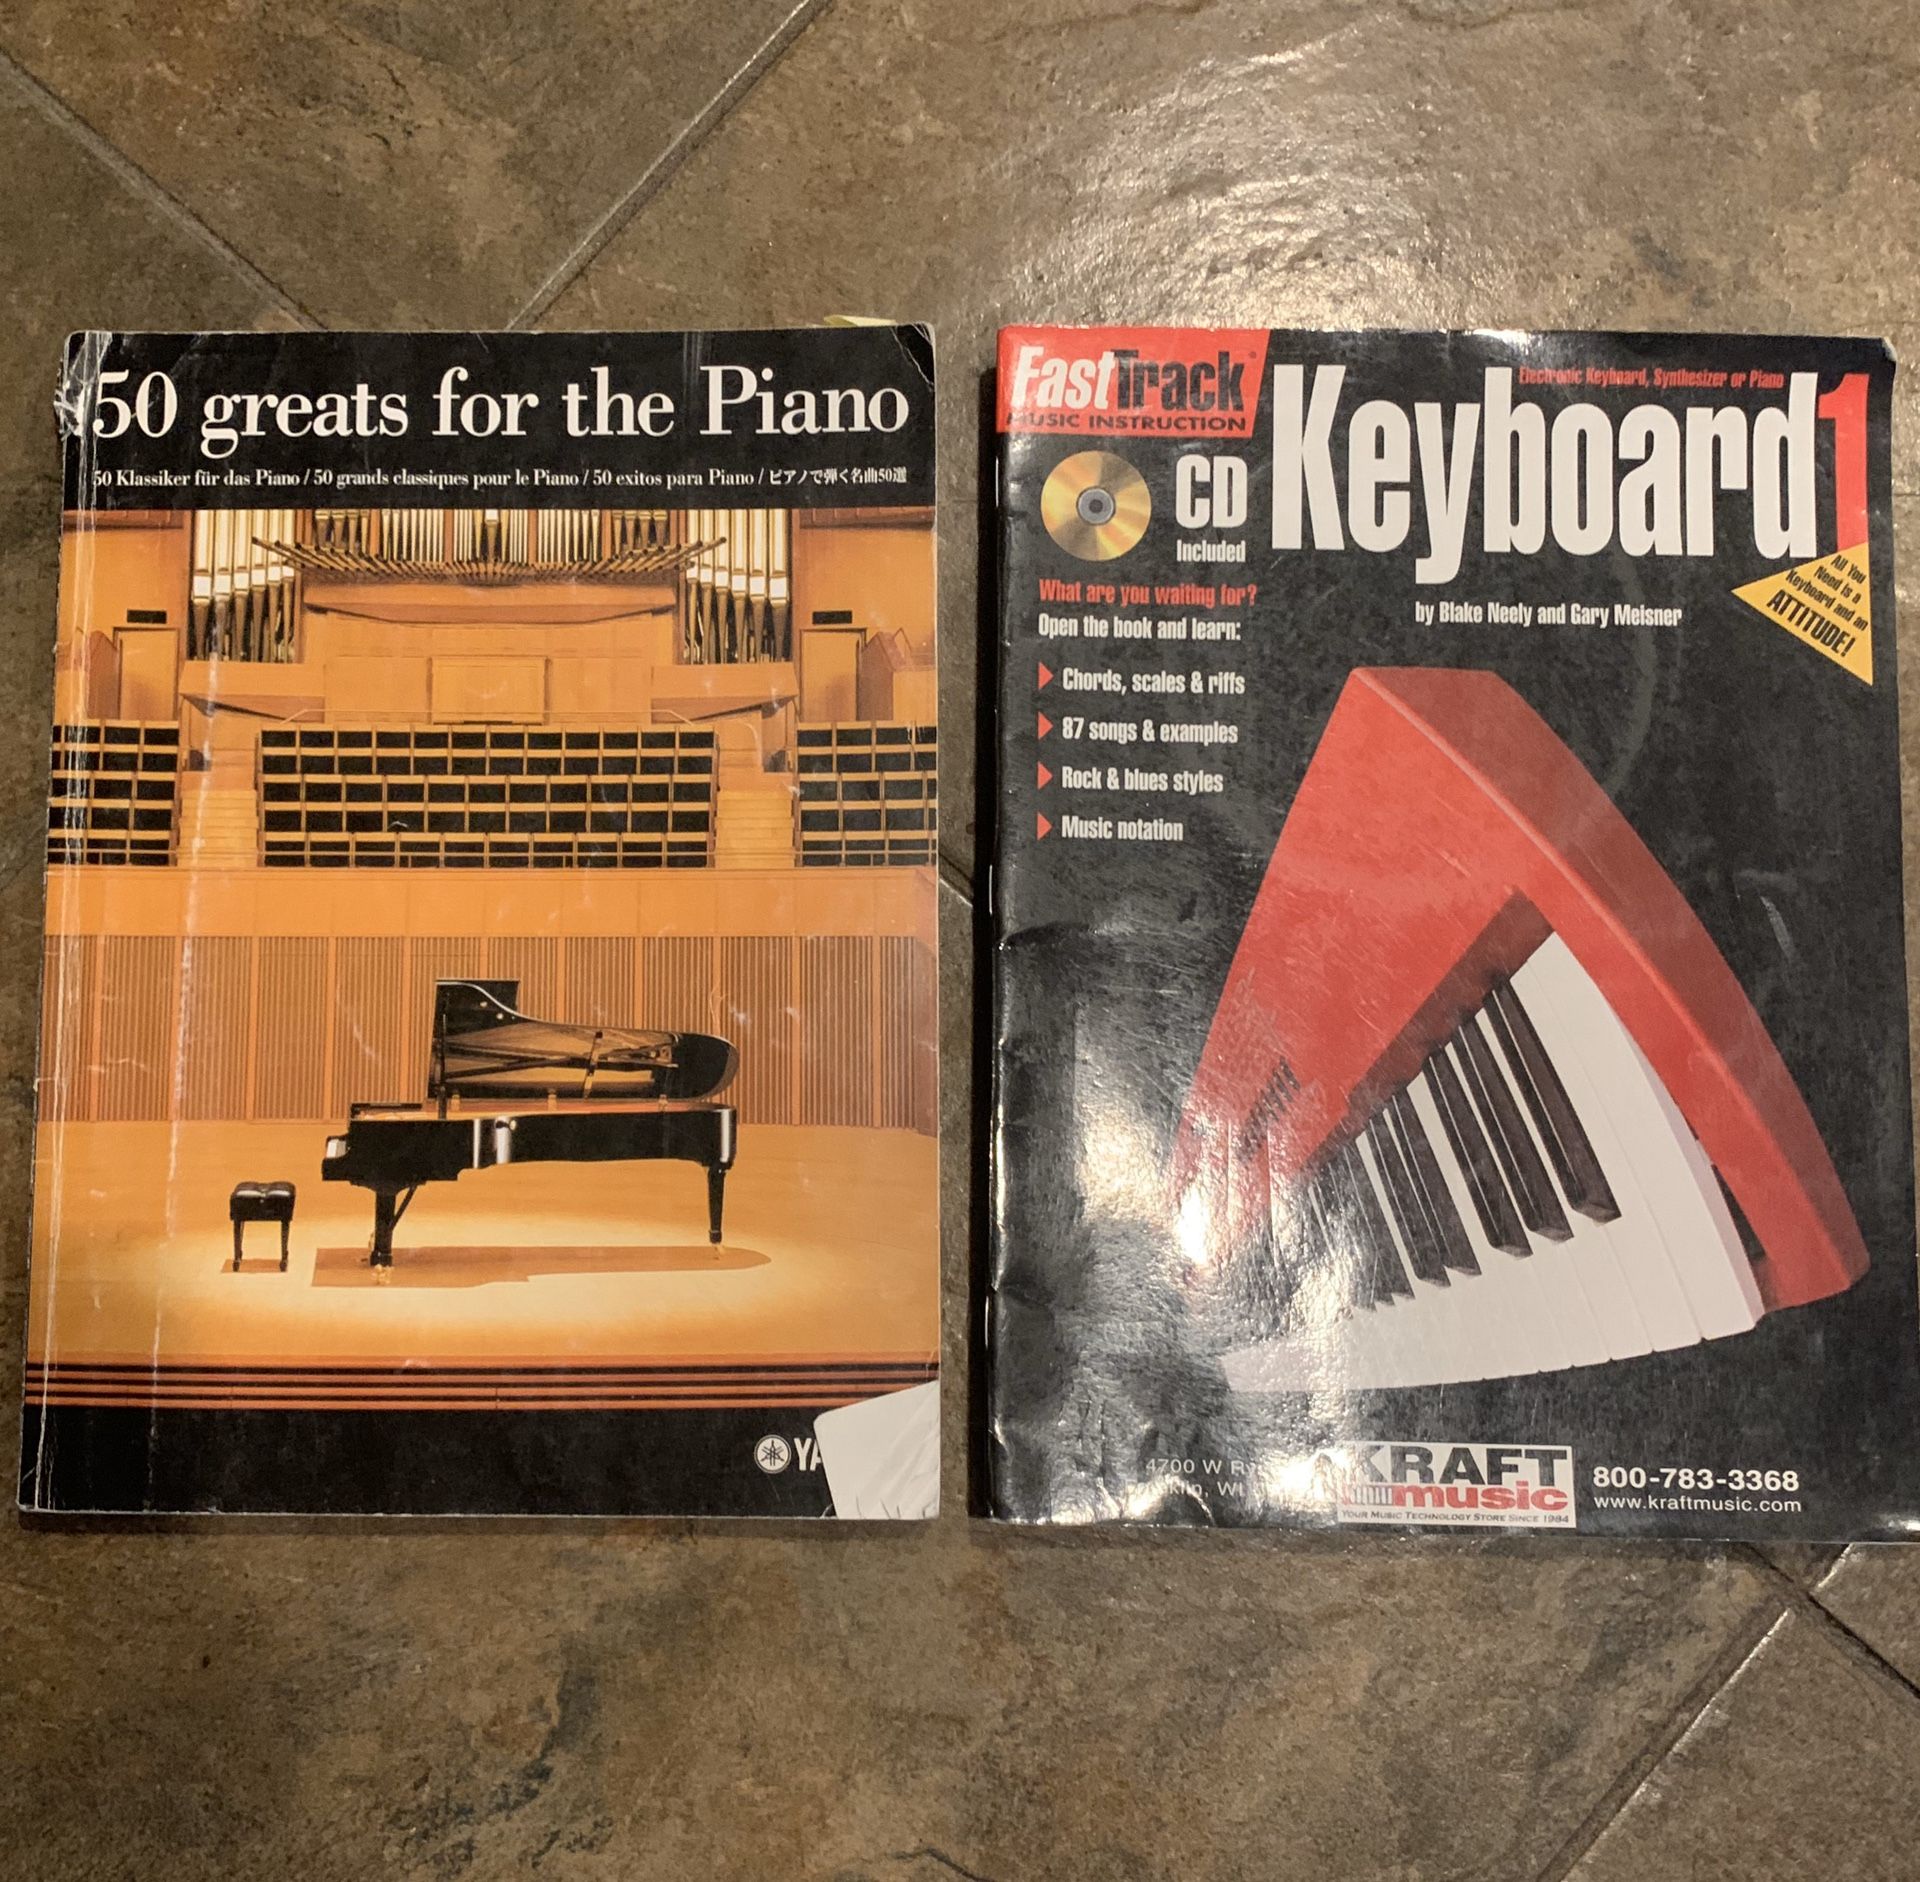 50 Greats For The Piano & FastTrack Music Instruction Keyboard 1 with CD